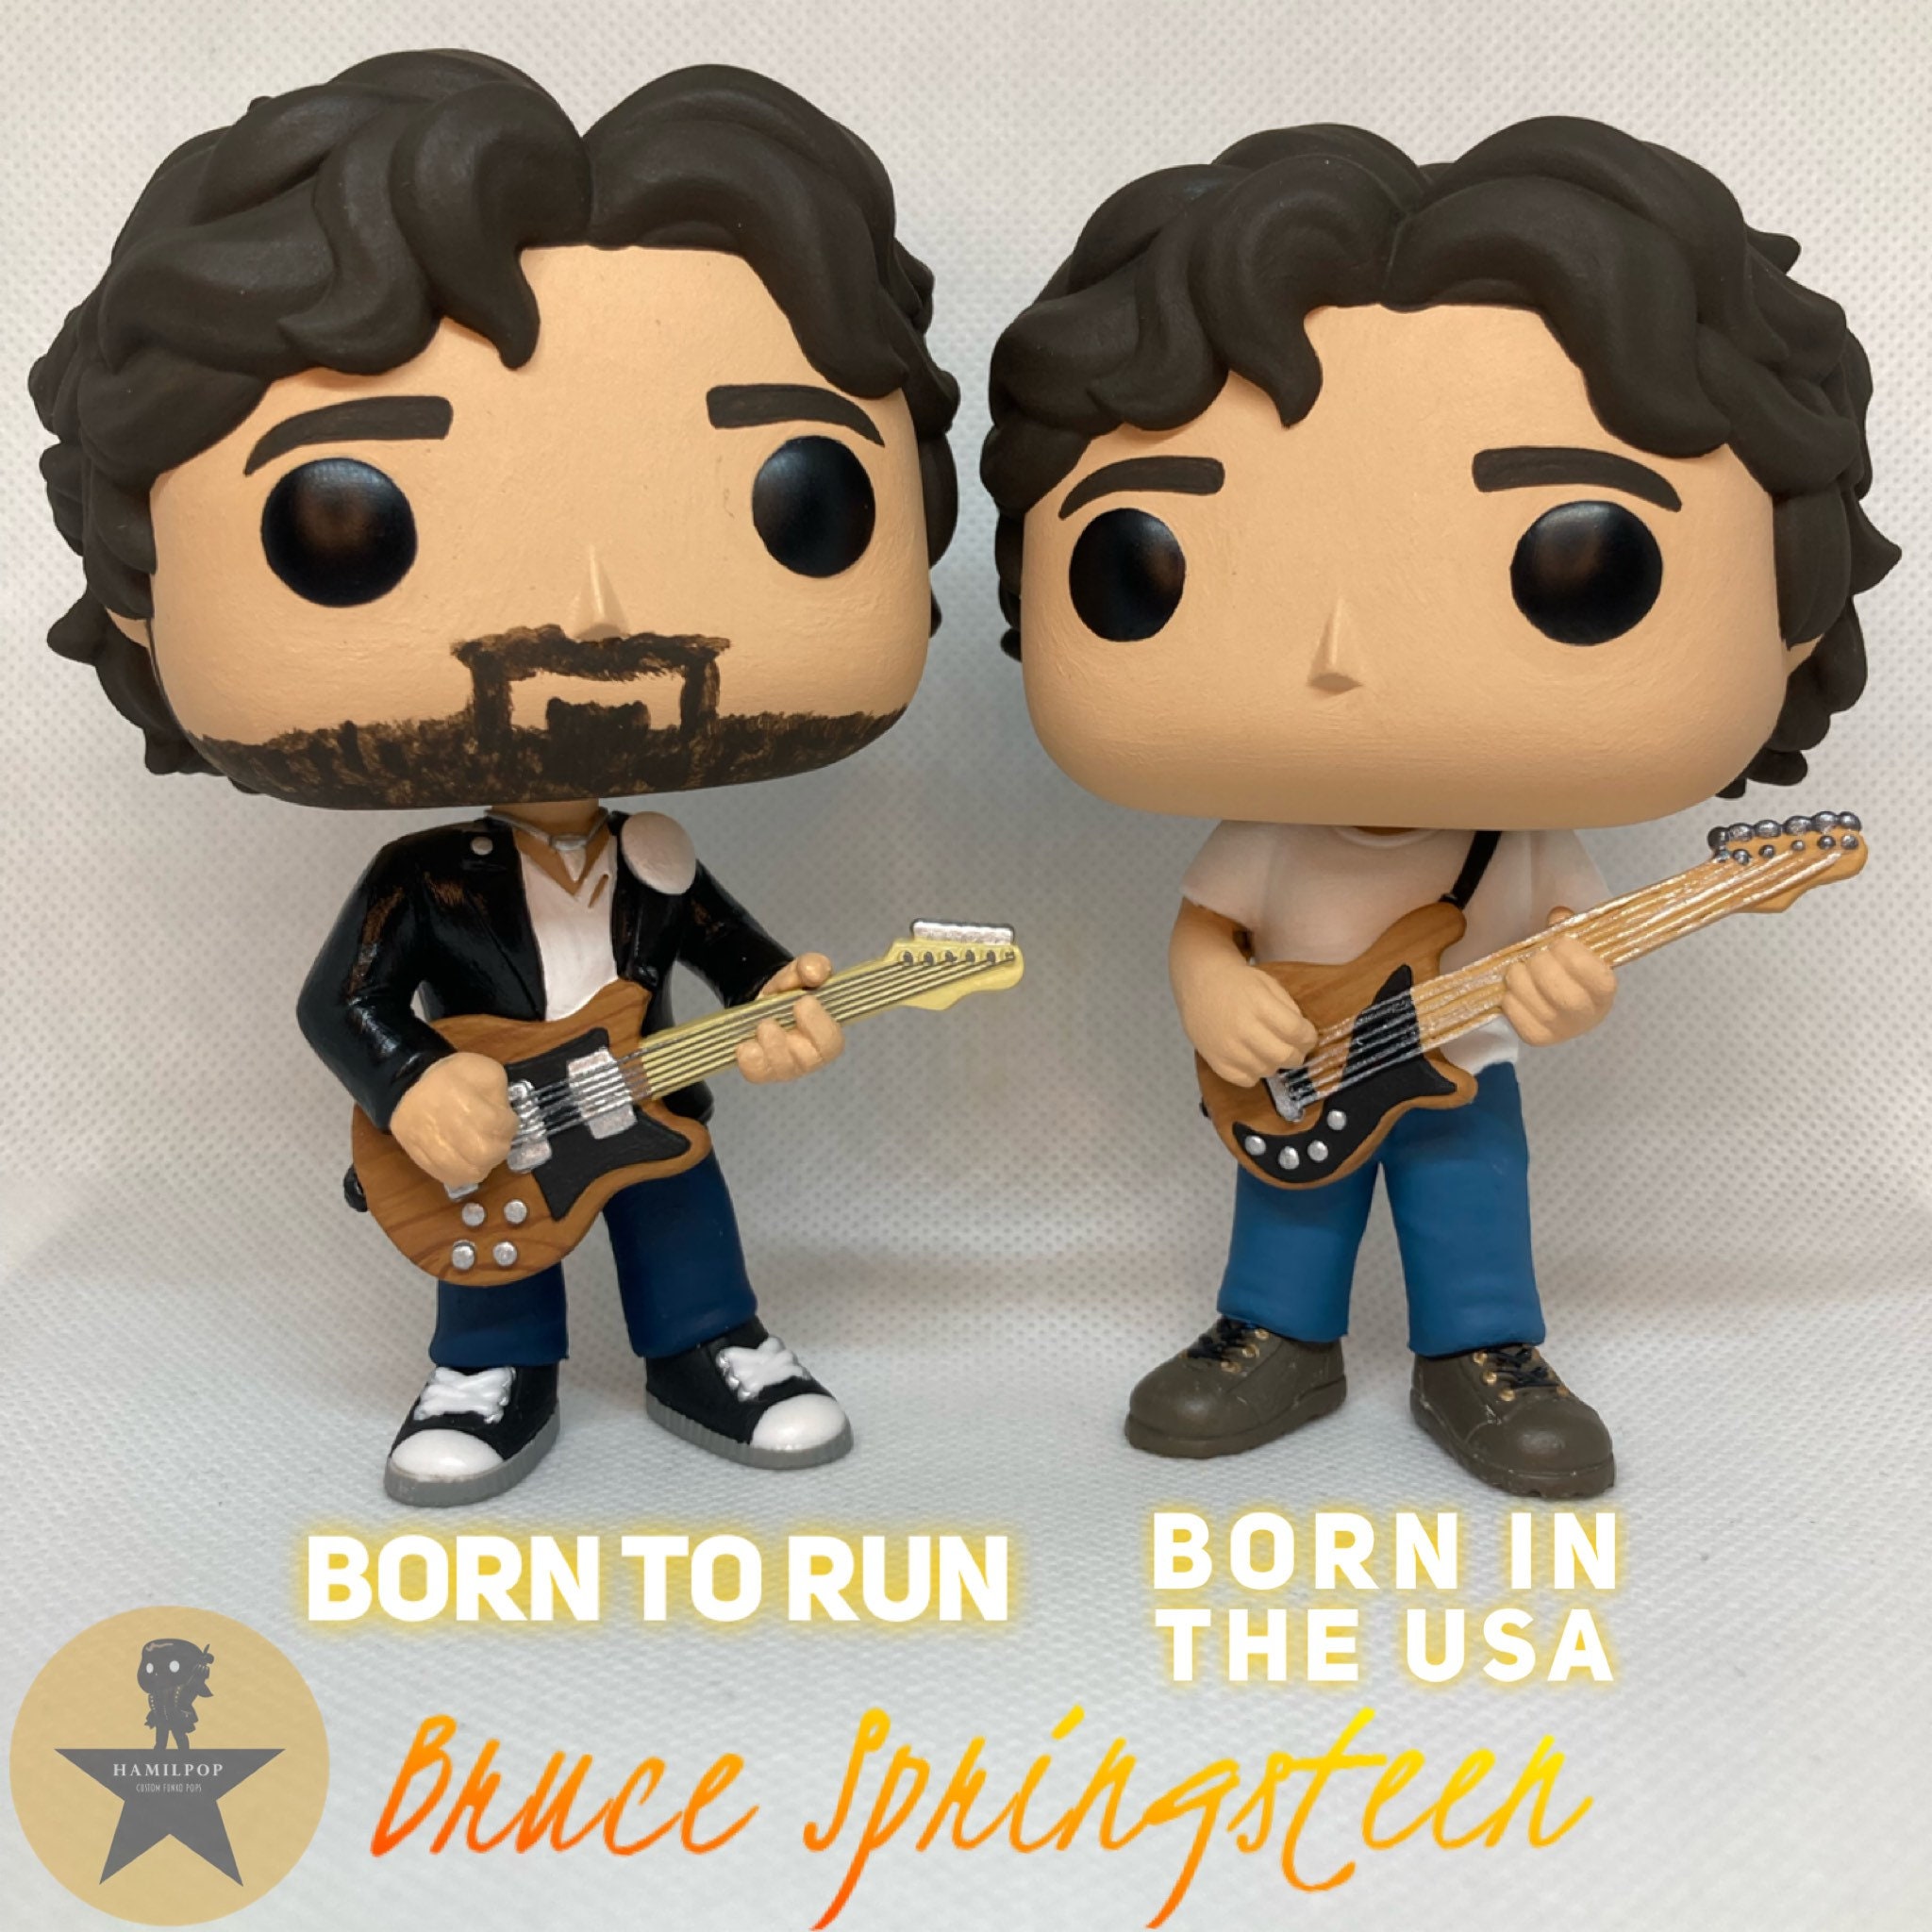 Springsteen to Run & in the USA - Etsy